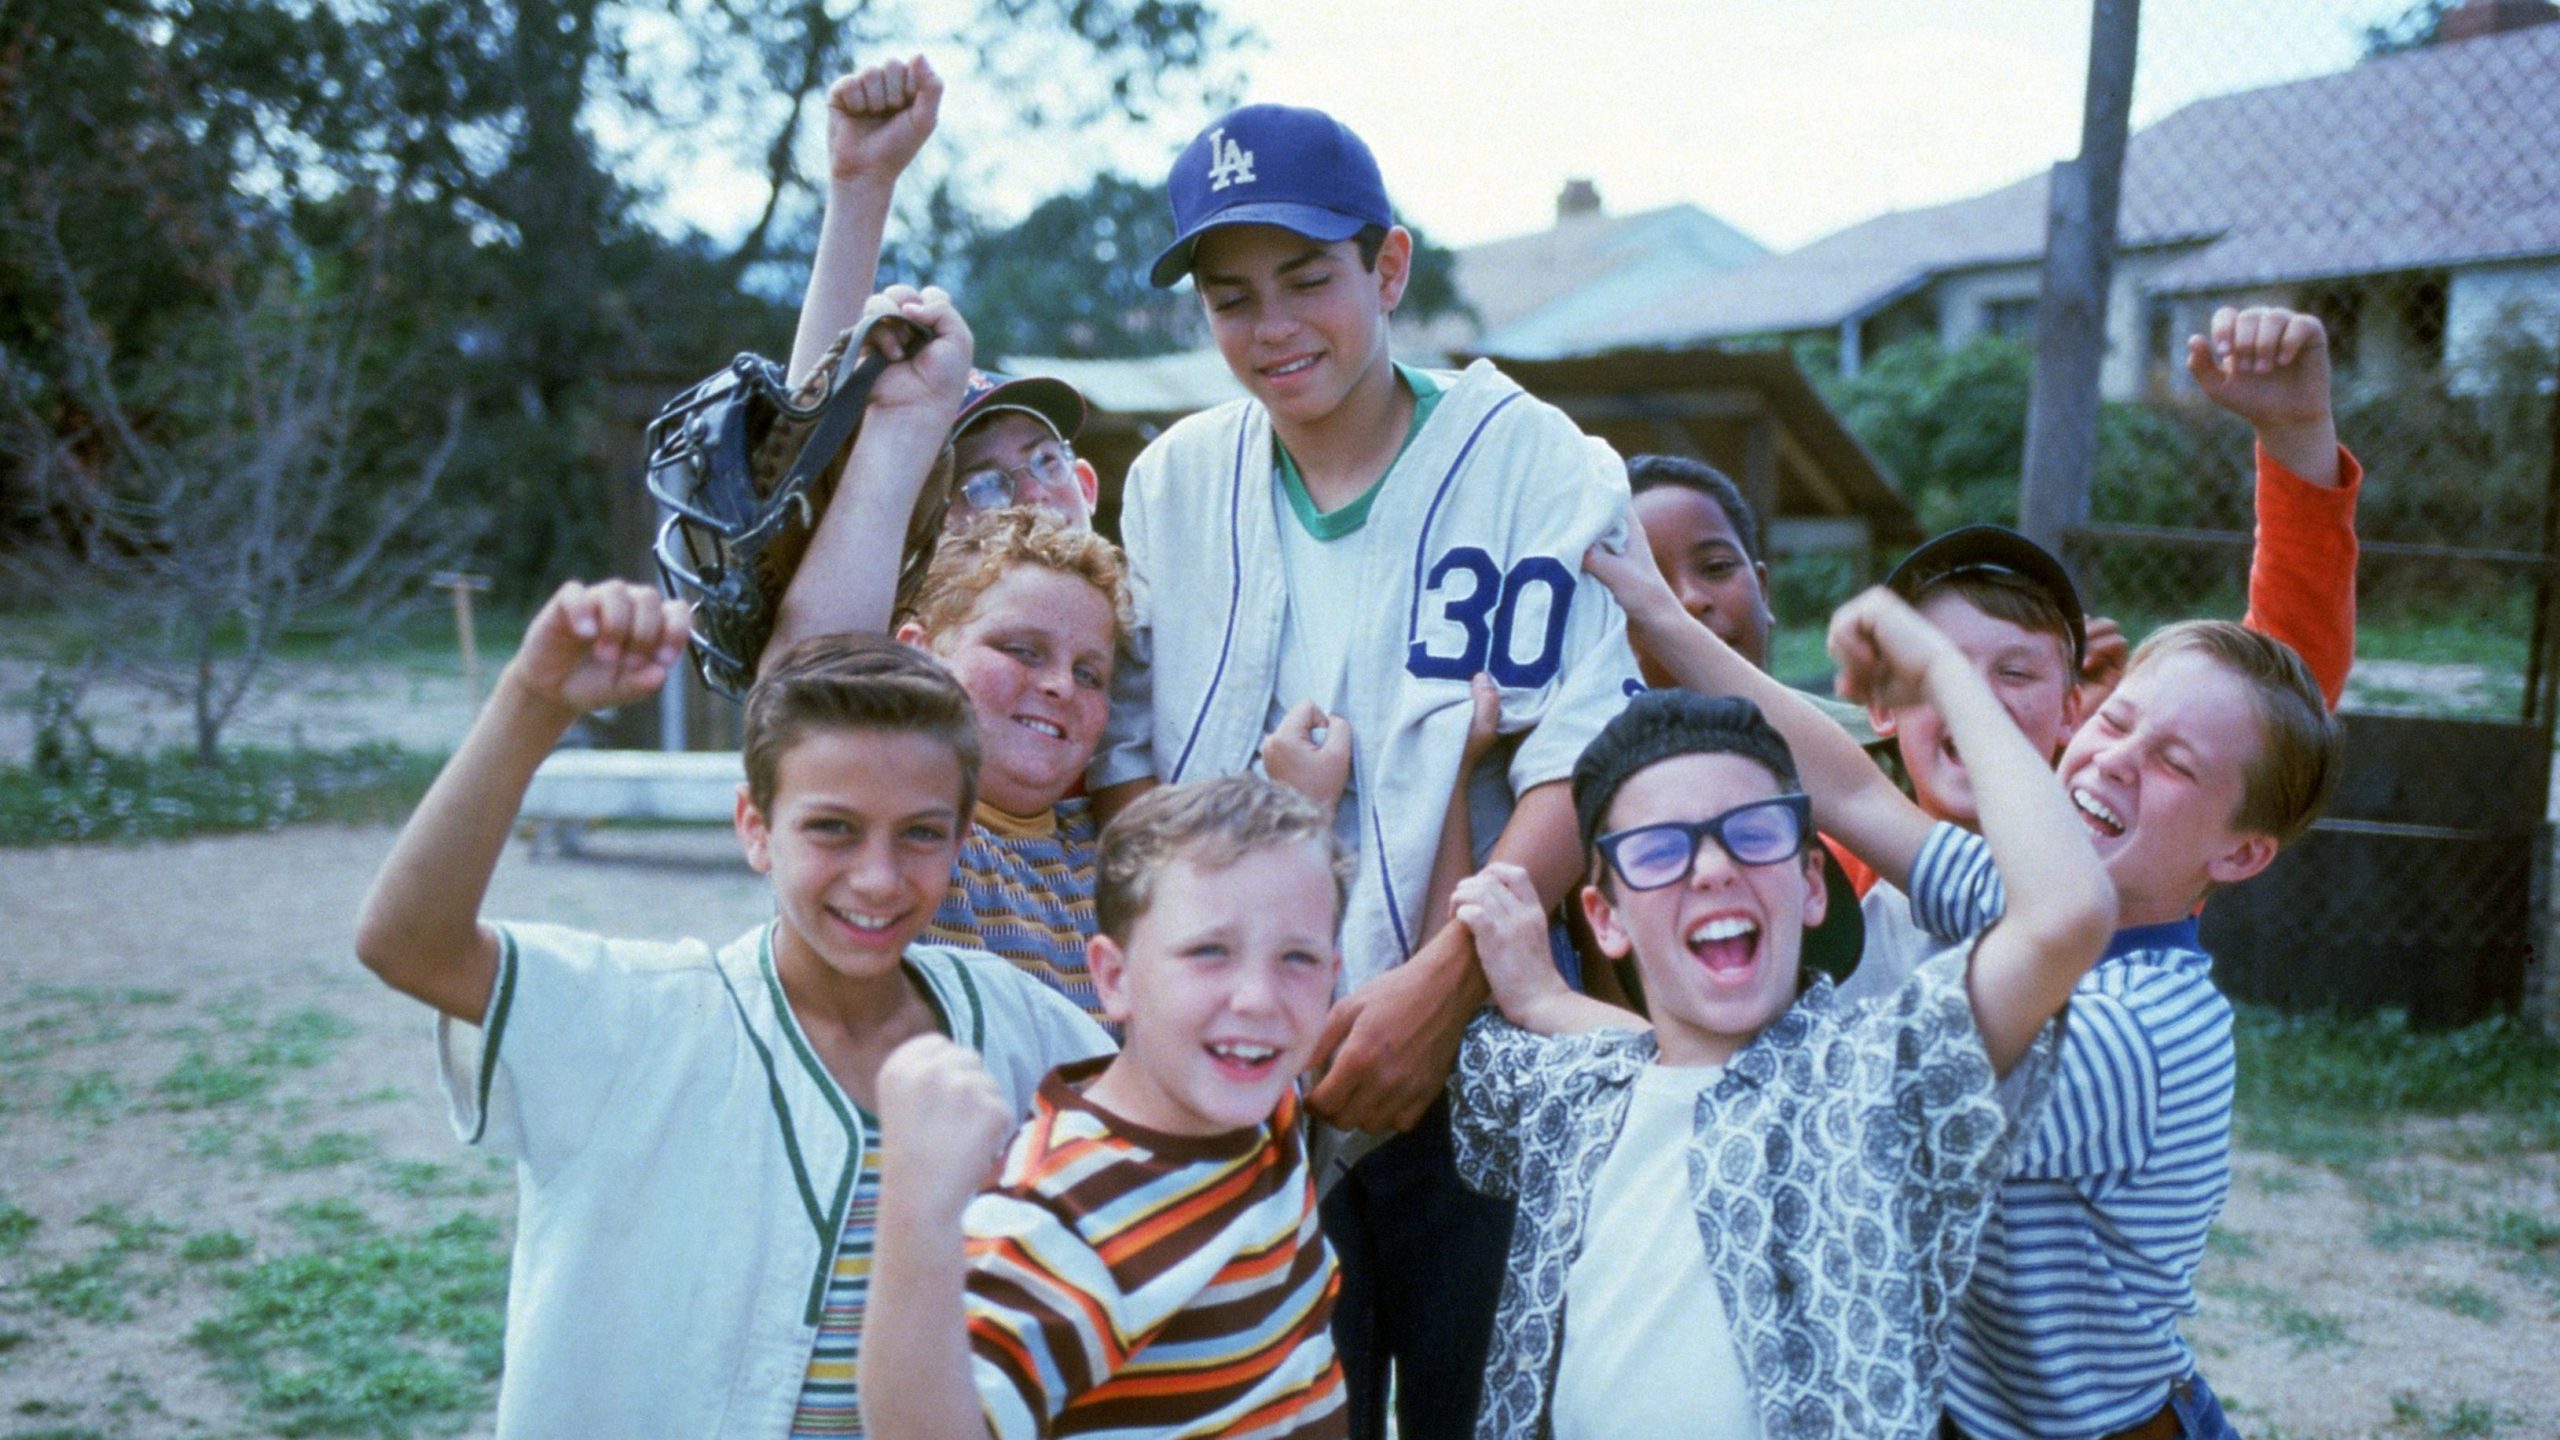 Director David Mickey Evans Confirms ‘The Sandlot’ Series Is Coming to Disney+